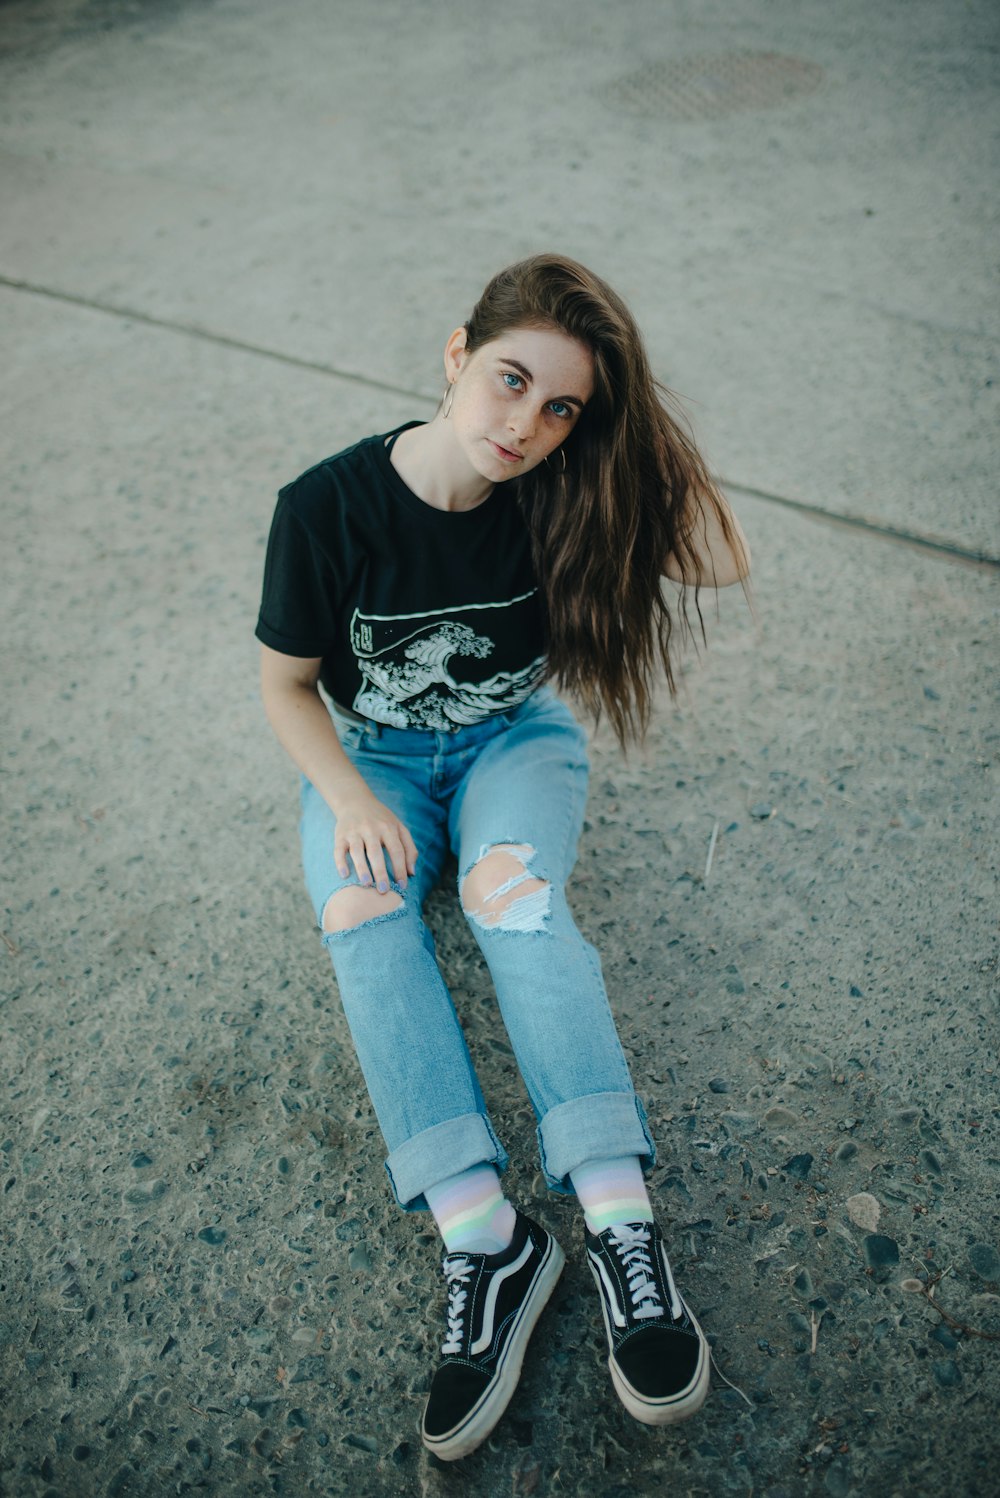 girl in black t-shirt and blue denim jeans sitting on concrete floor photo  – Free Chile Image on Unsplash